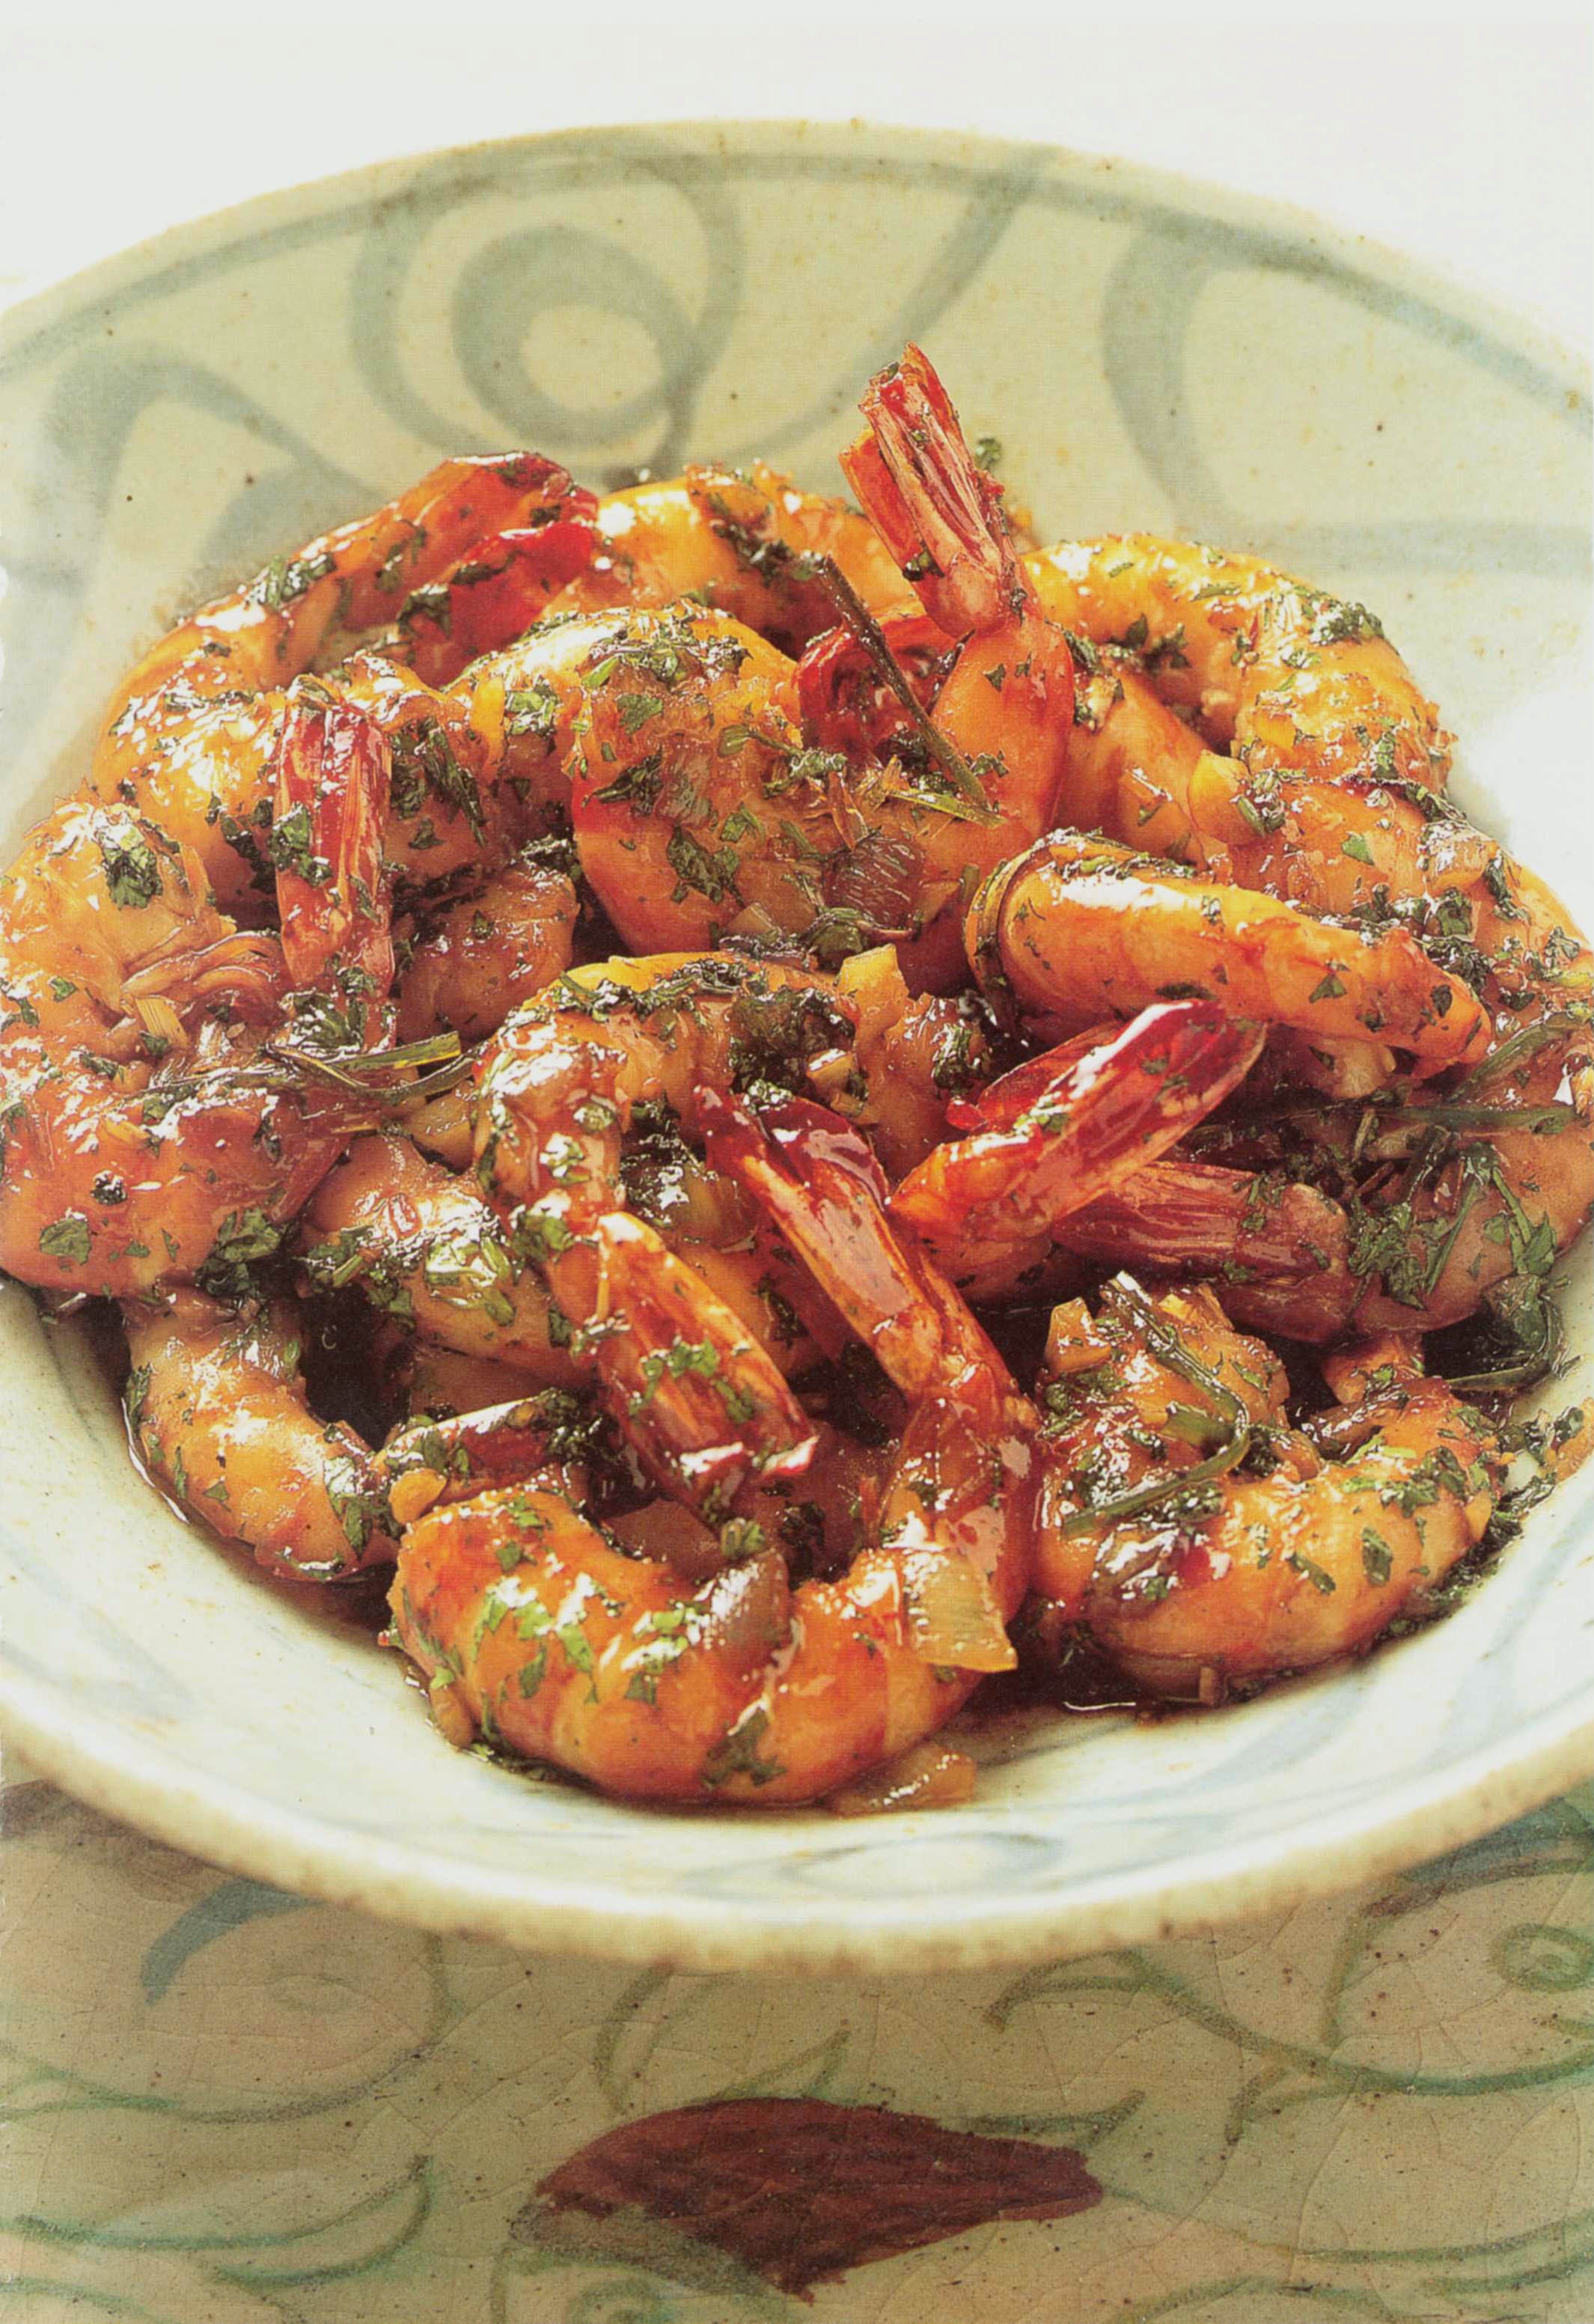 Stir-fried Prawns with Oyster Sauce from Ken Hom Cooks Thai by Ken Hom